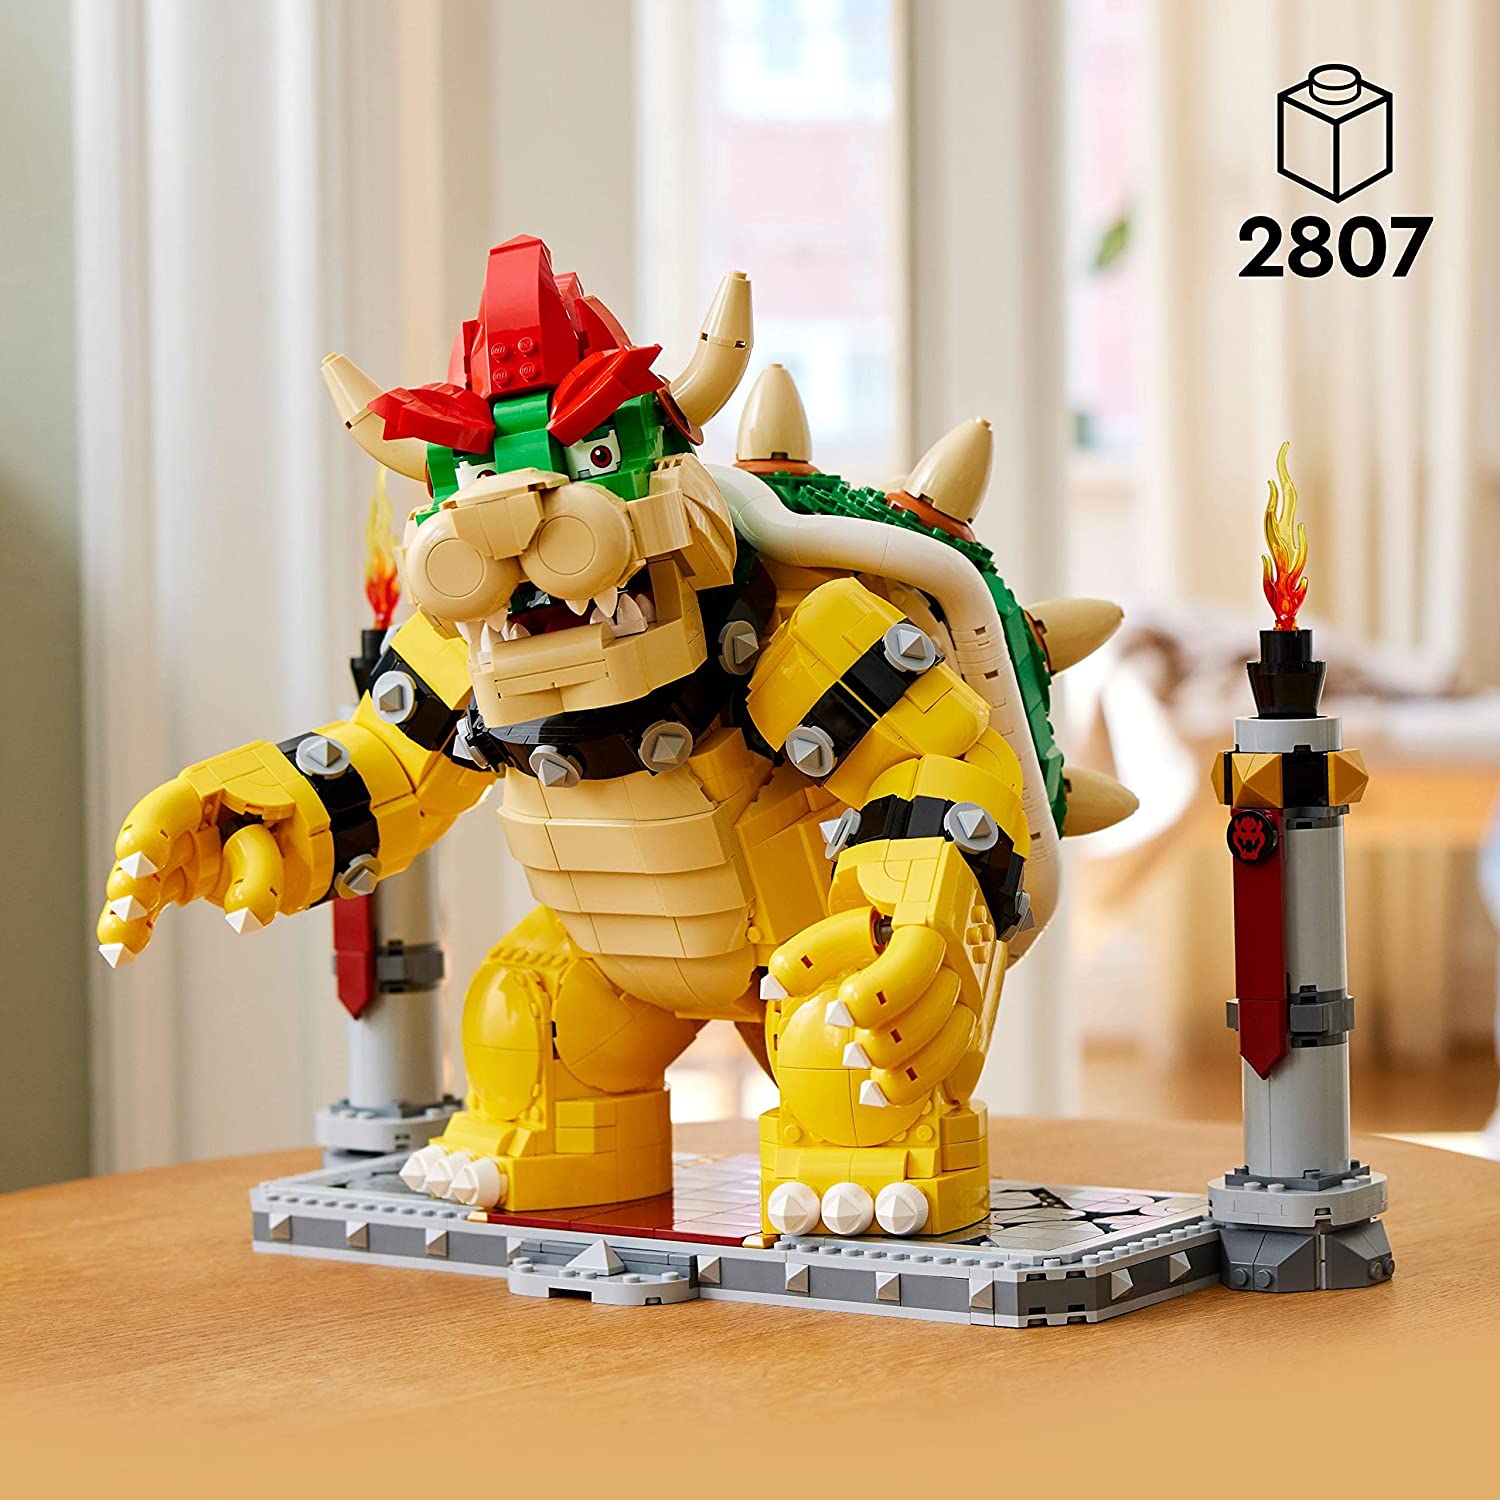 Lego Mighty Bowser product shot